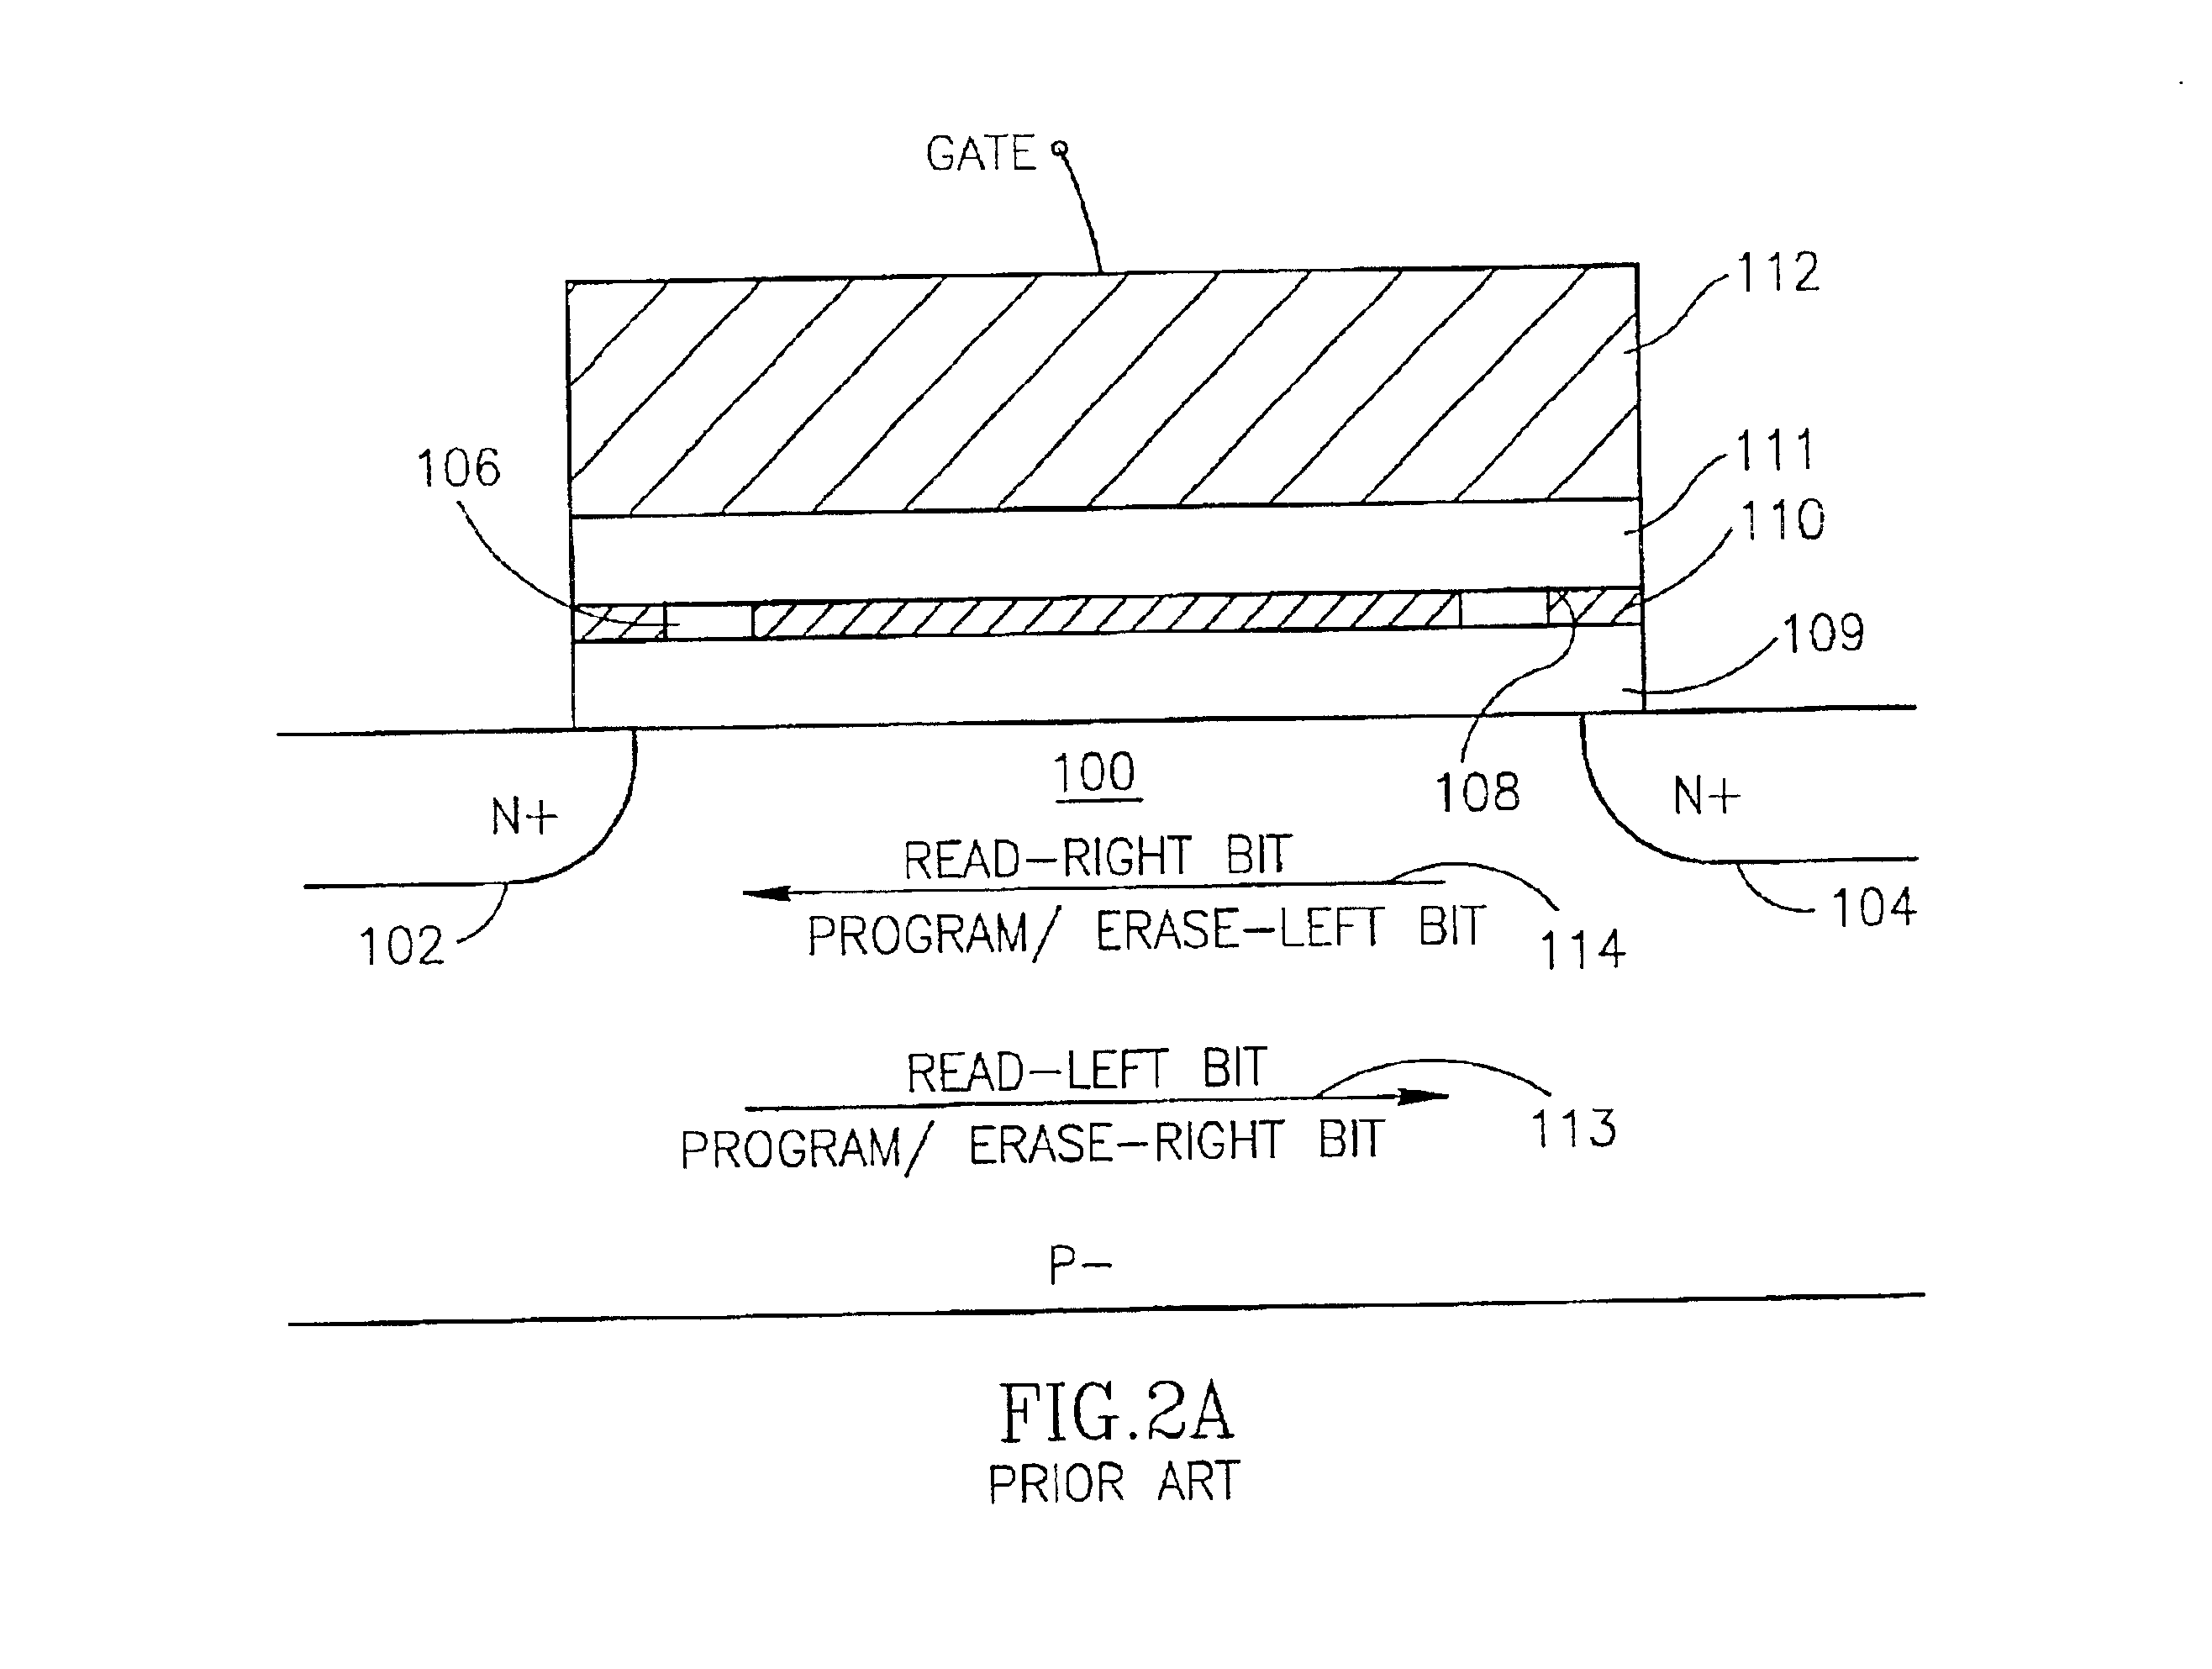 Programming and erasing methods for a non-volatile memory cell